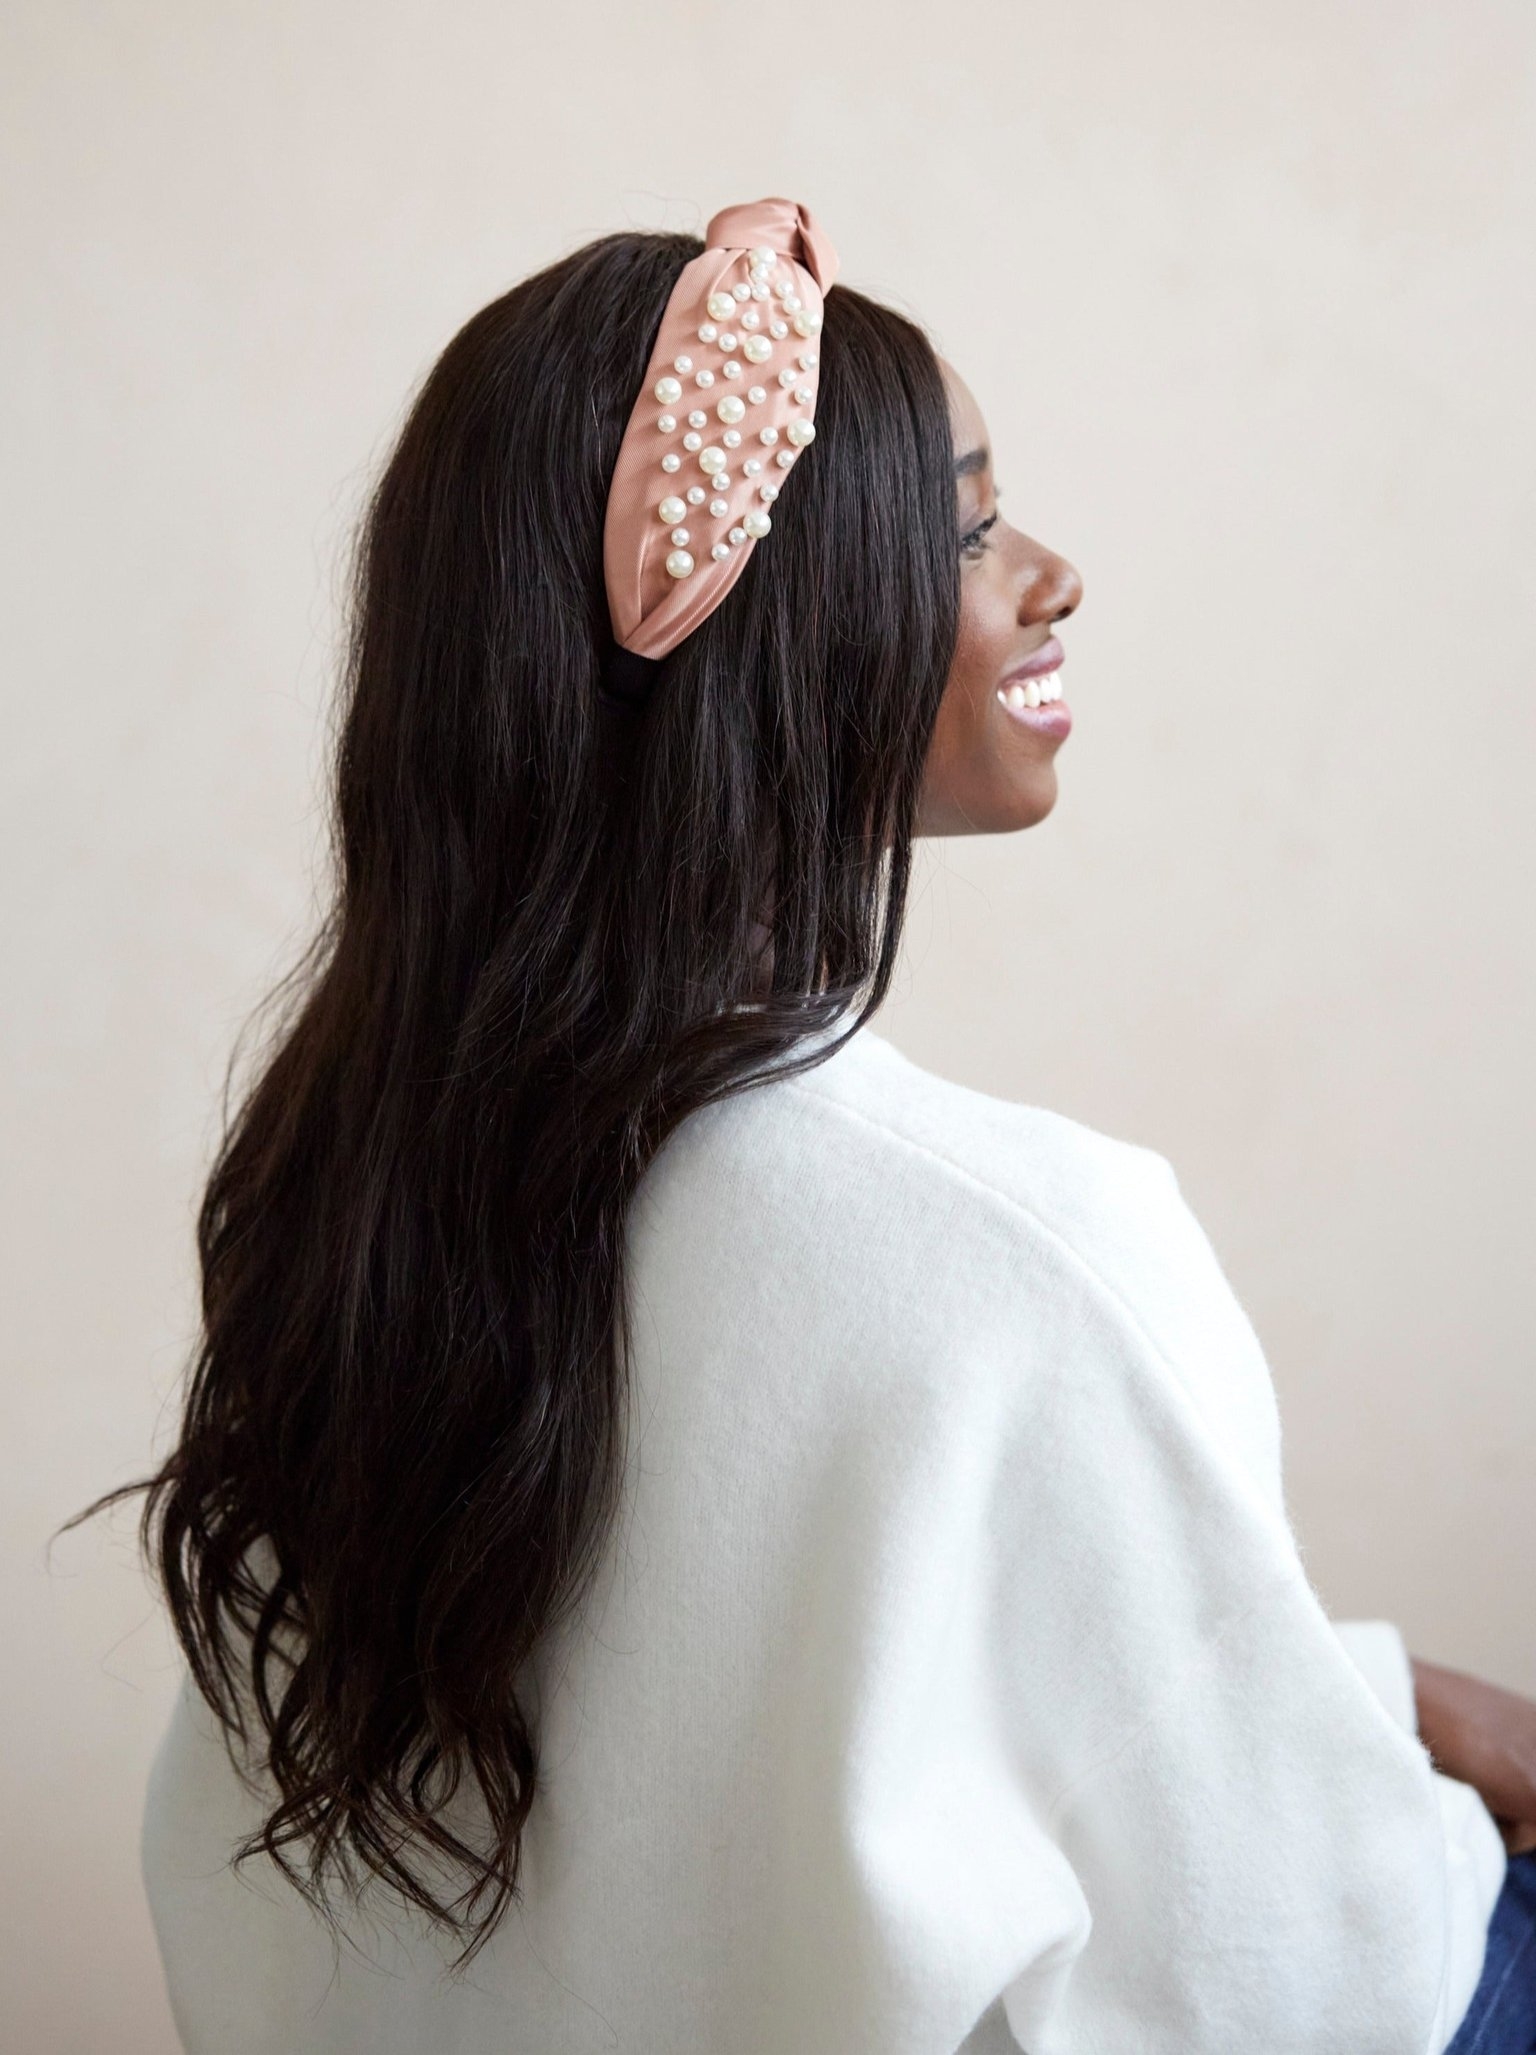 a model wearing the blush colored headband with pearls on it